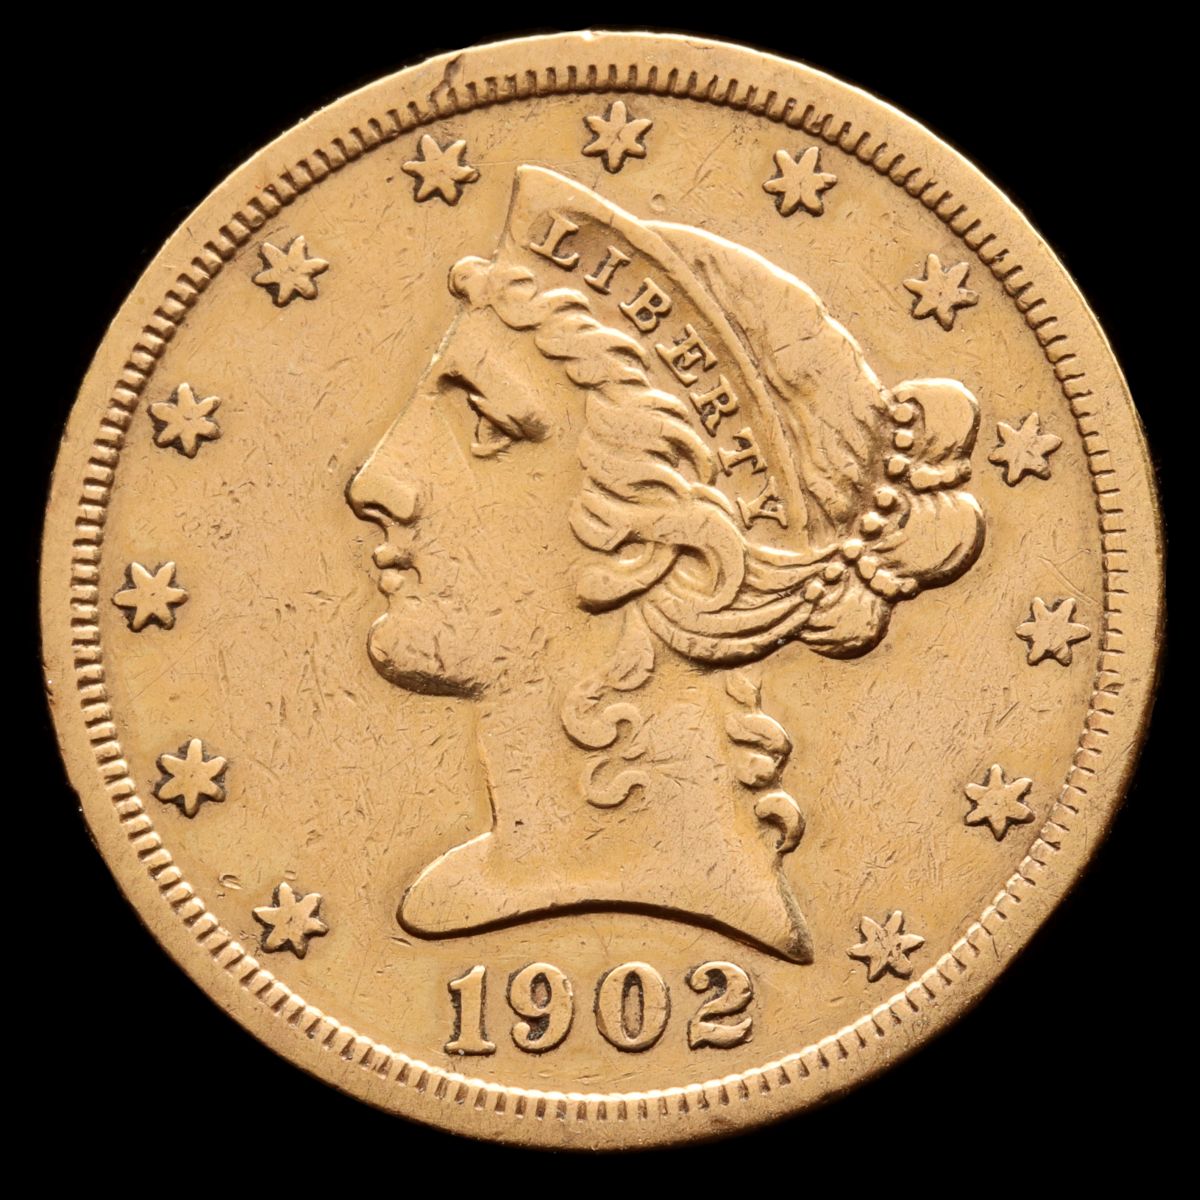 A 1902-S LIBERTY HEAD $5 US GOLD COIN